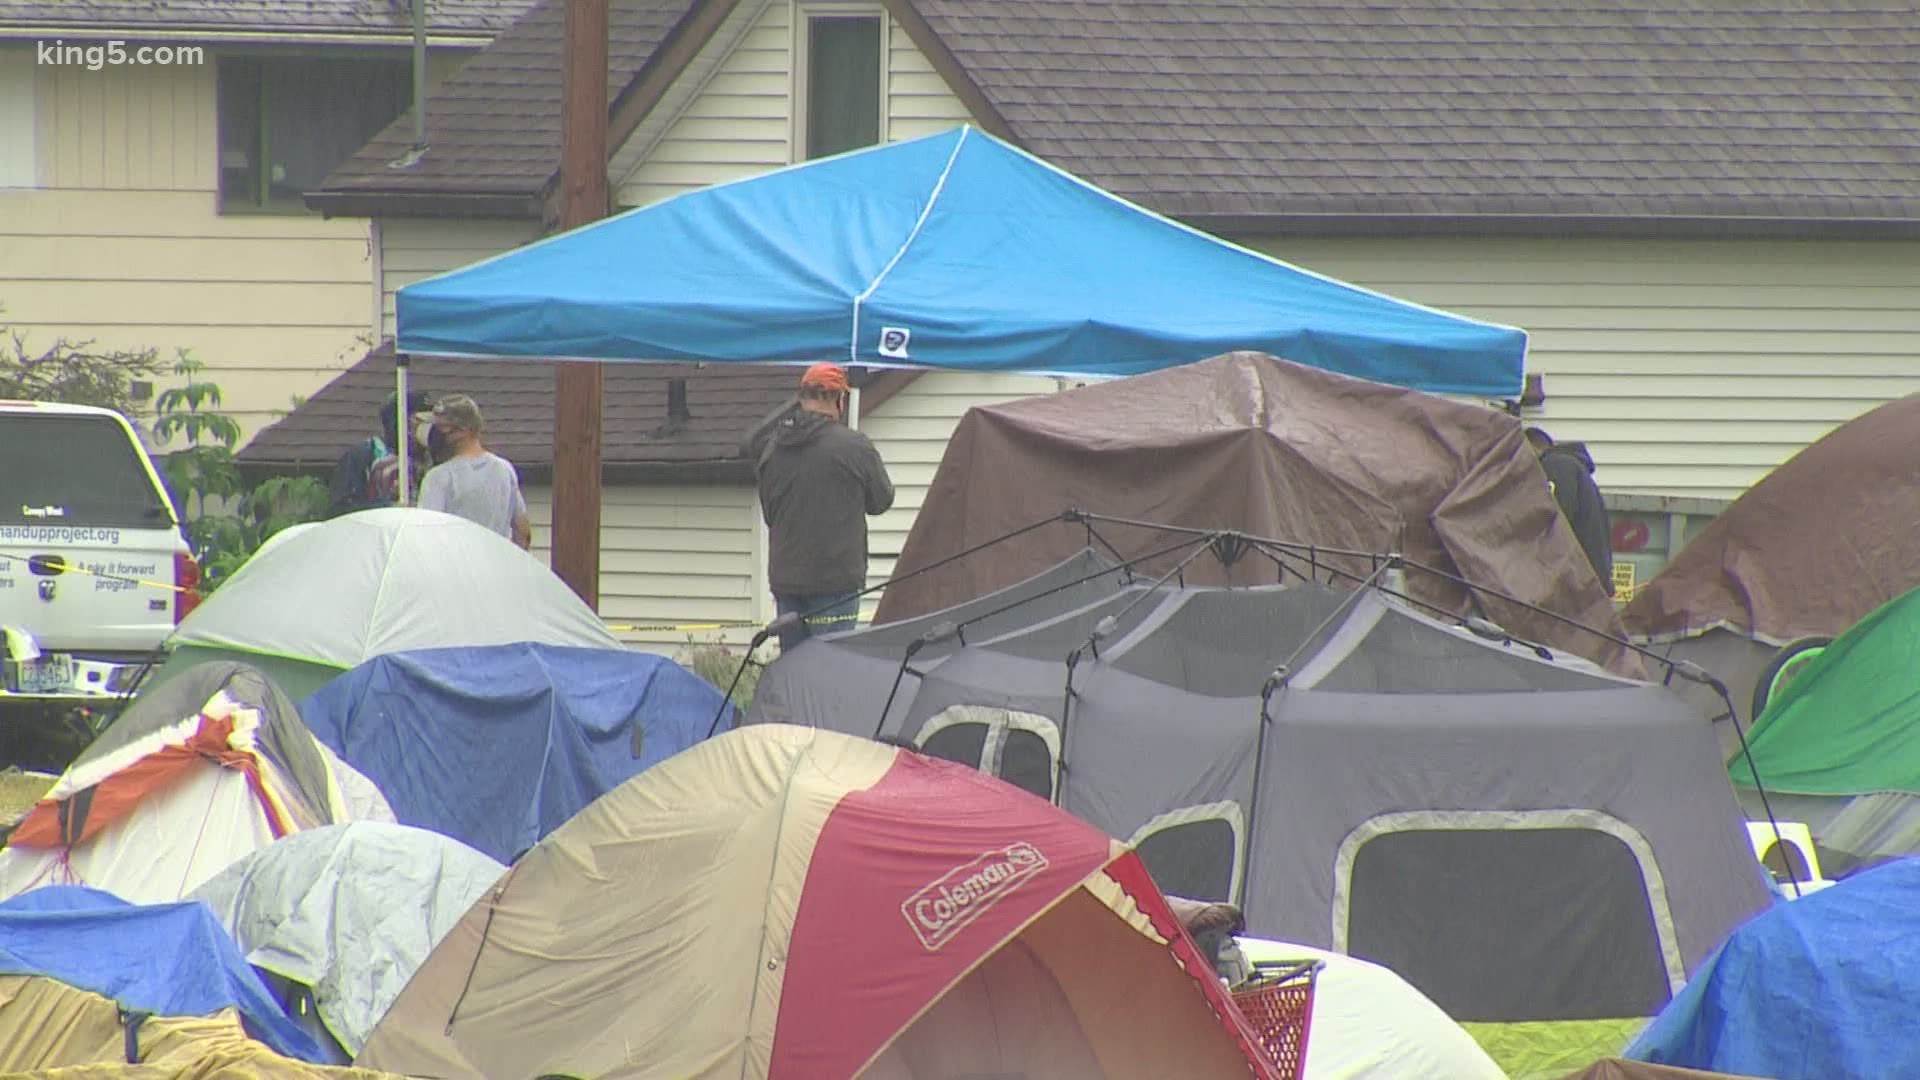 The property owner says he's allowing people to camp on the site, while non-profits help connect people with resources to get them off the streets.